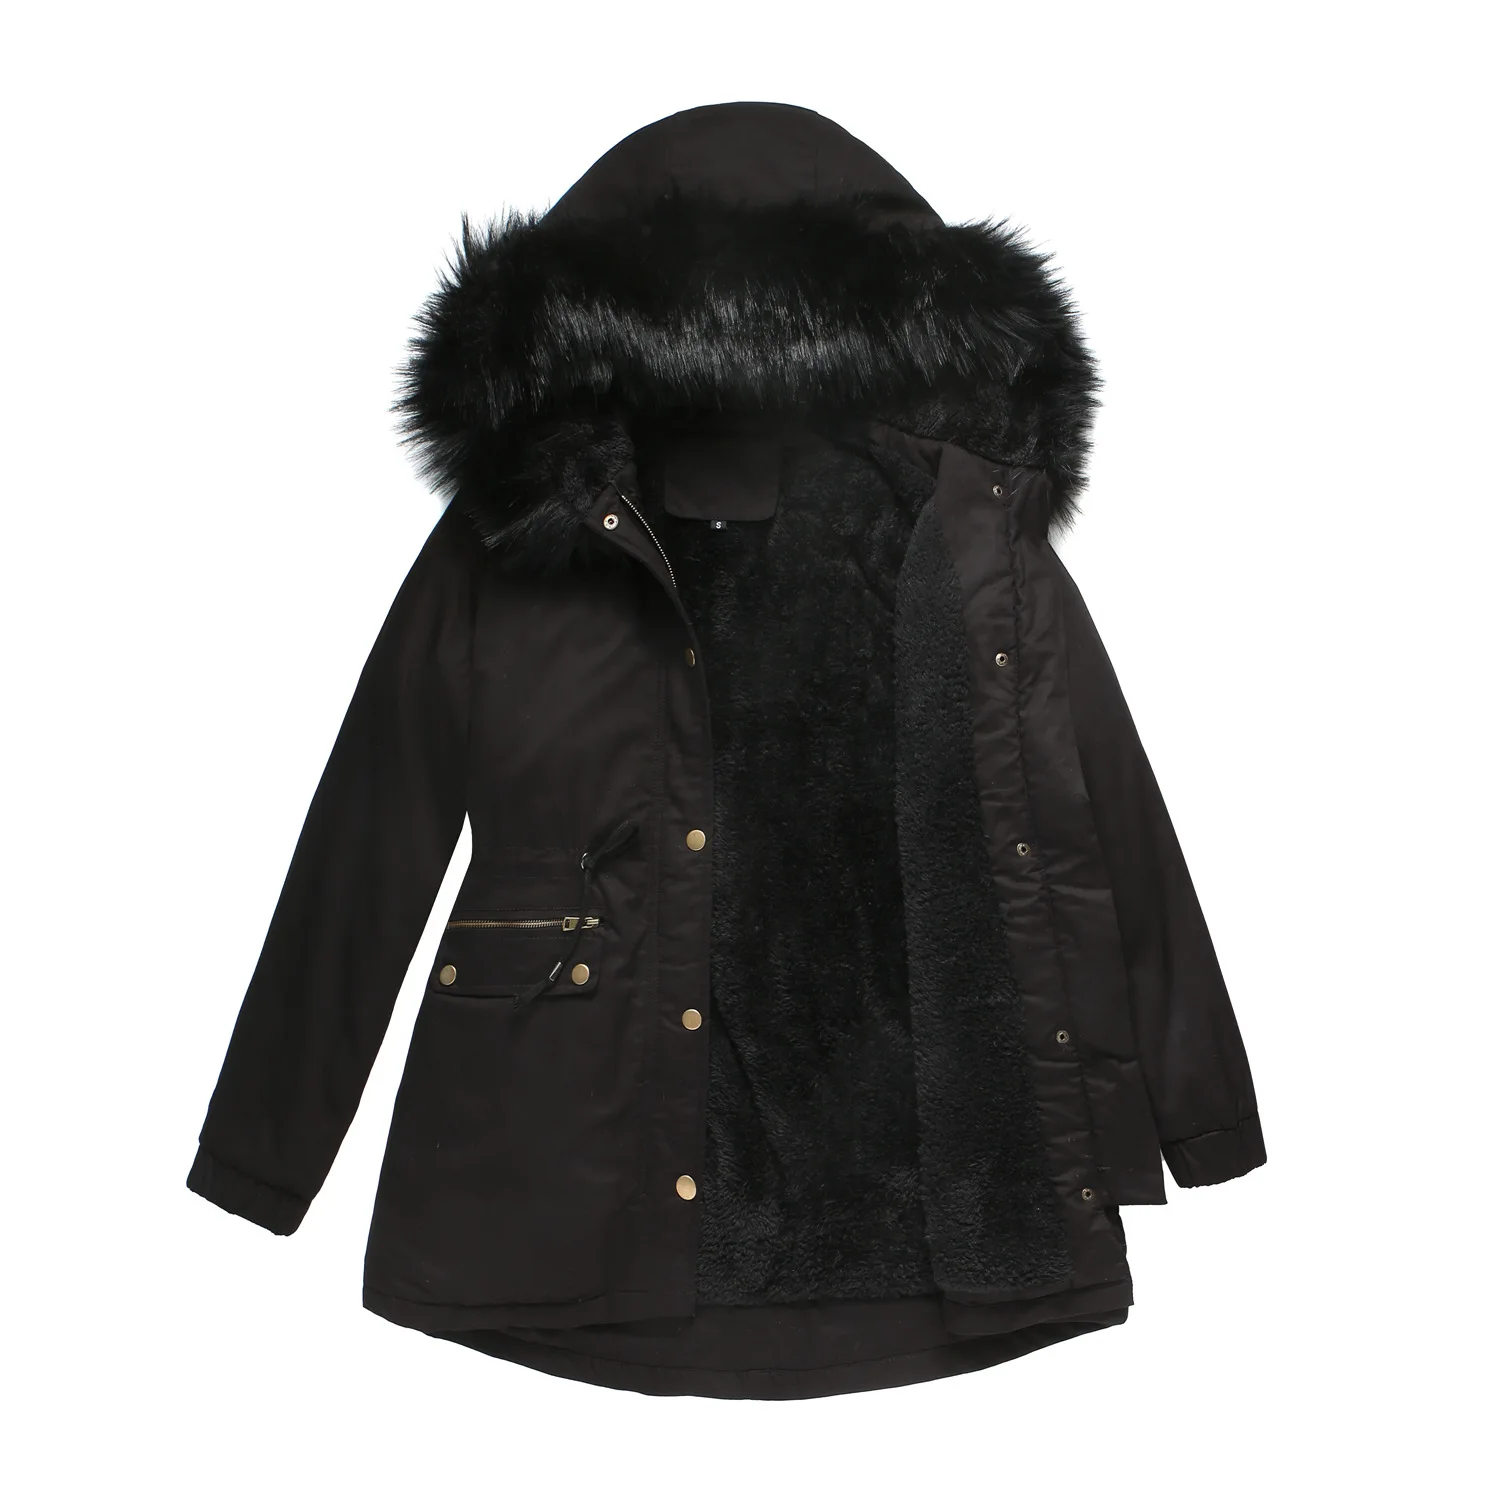 Winter Puffer Coats for Women Warm Hooded Outerwear Solid Thick Padded Jacket Fleece Lined Parka with Fur Trim